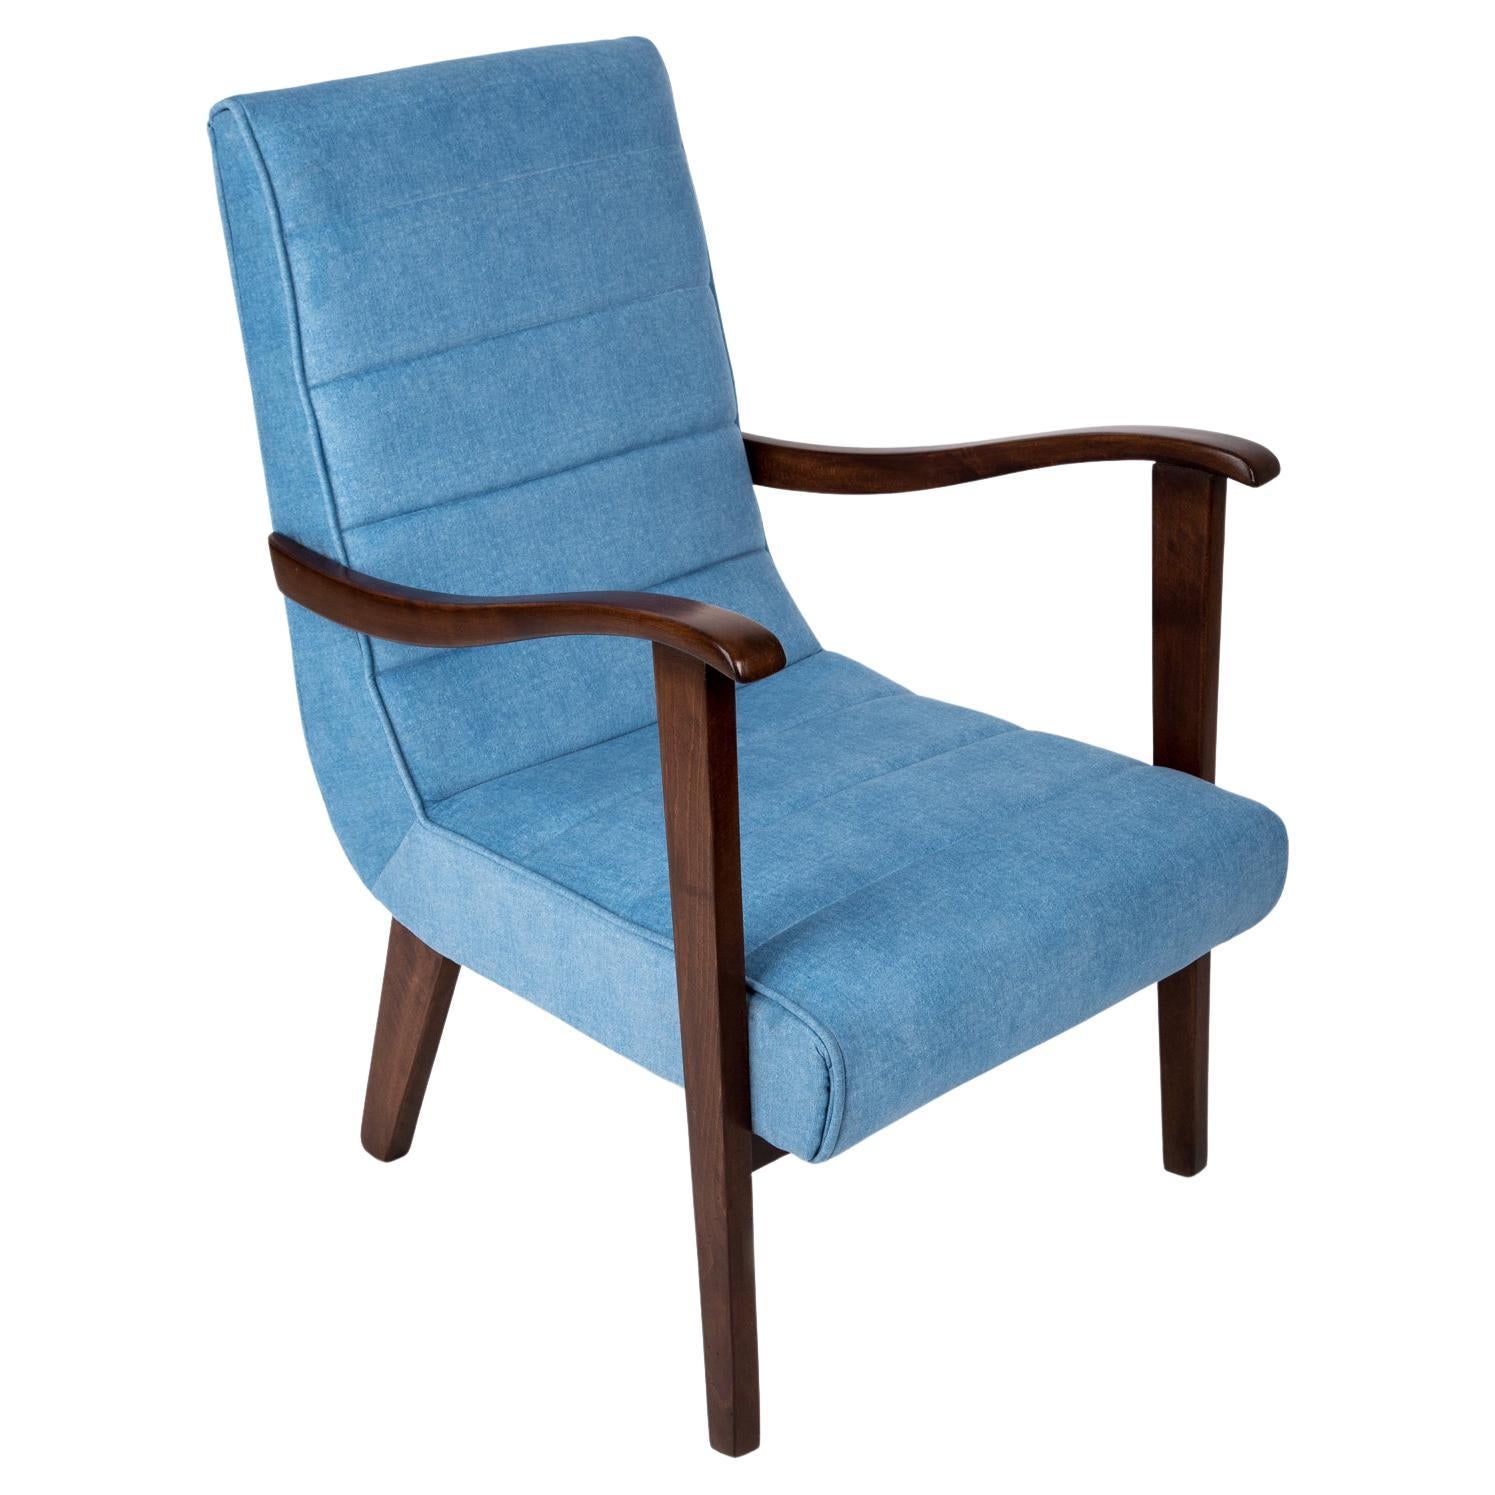 Mid-Century Modern Blue Armchair by Prudnik Furniture Factory, Poland, 1960s For Sale